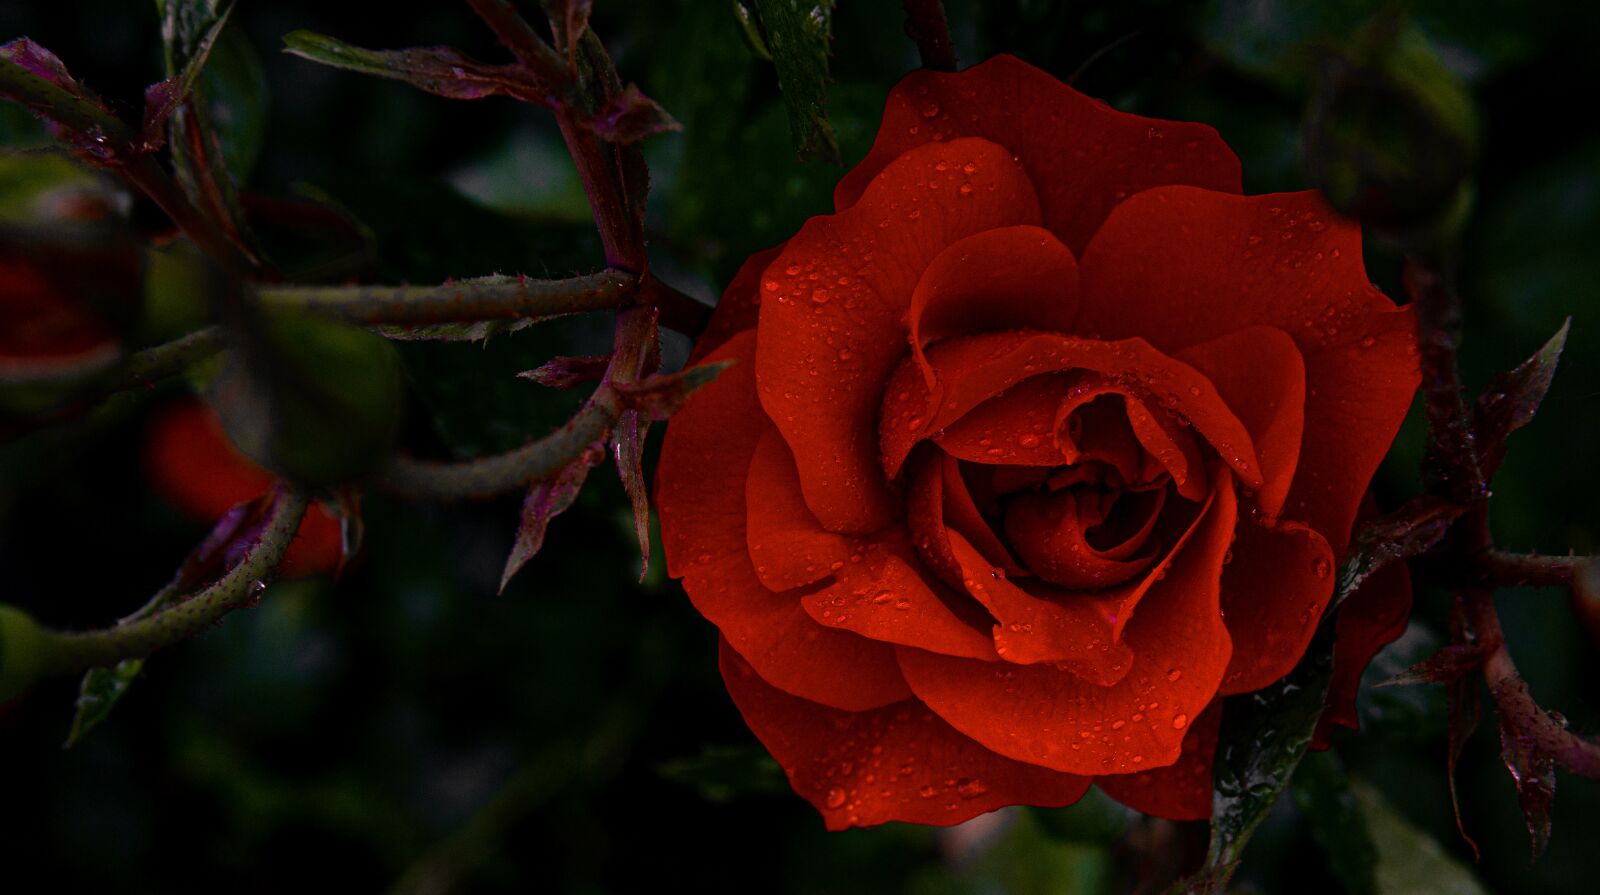 Sony a6300 sample photo. Rose, red, roses photography